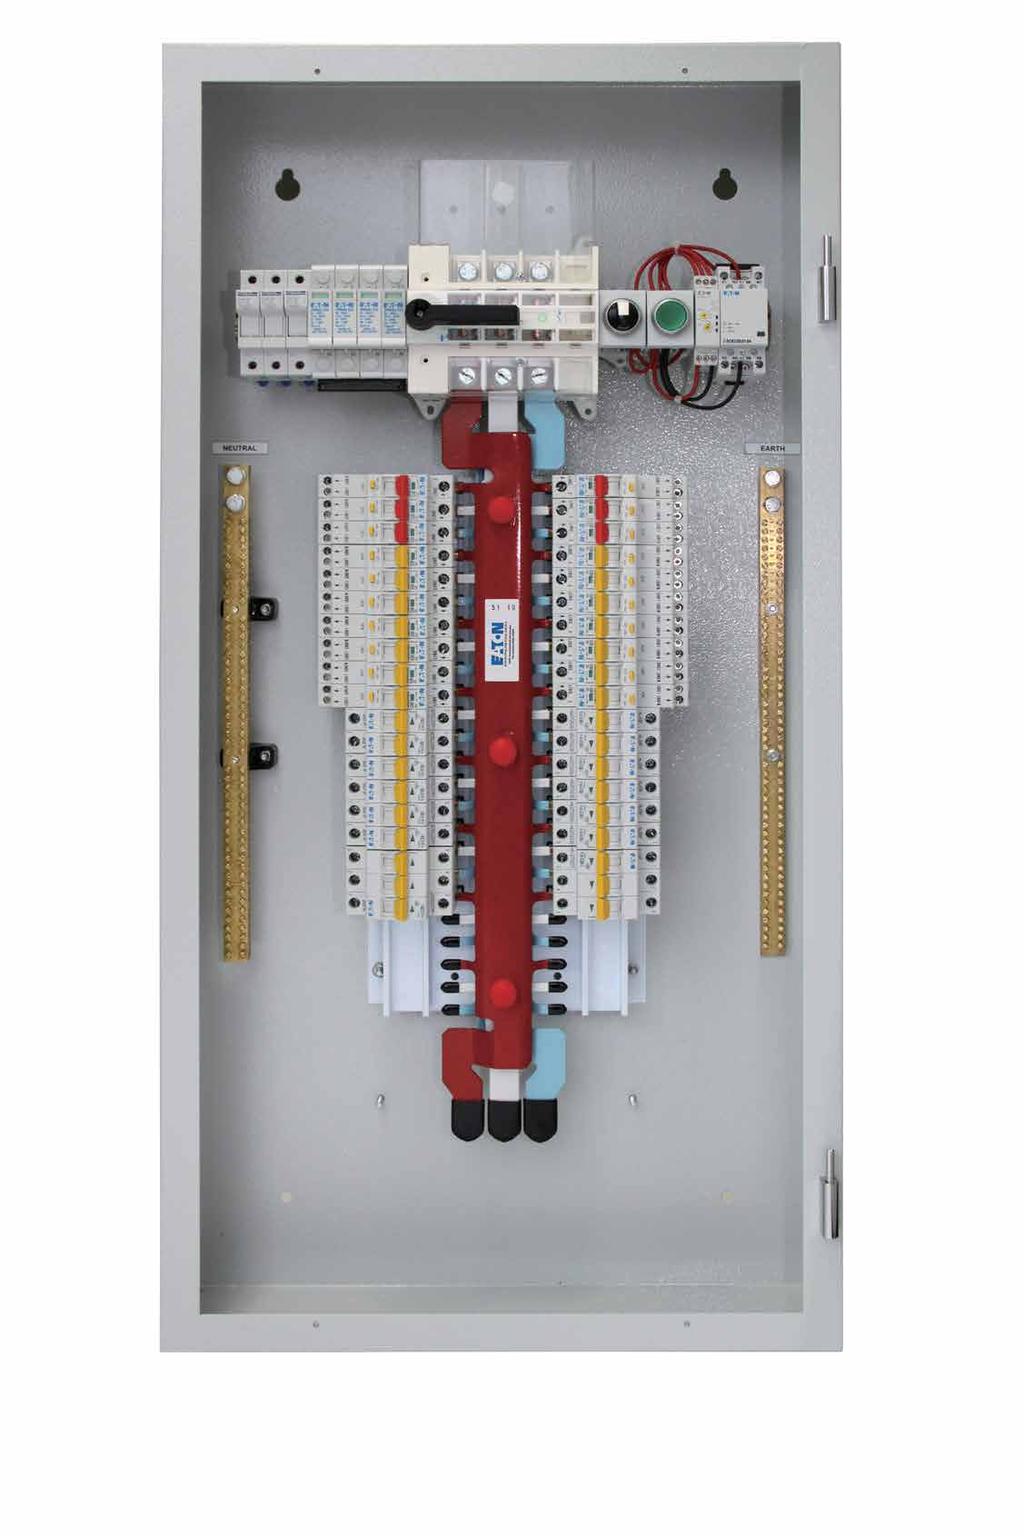 Miniature circuit breakers (MCB s) - PLSM range Contact position indicator red - green Guide for secure terminal connection 3-position DIN rail clip, permits removal from existing busbar system